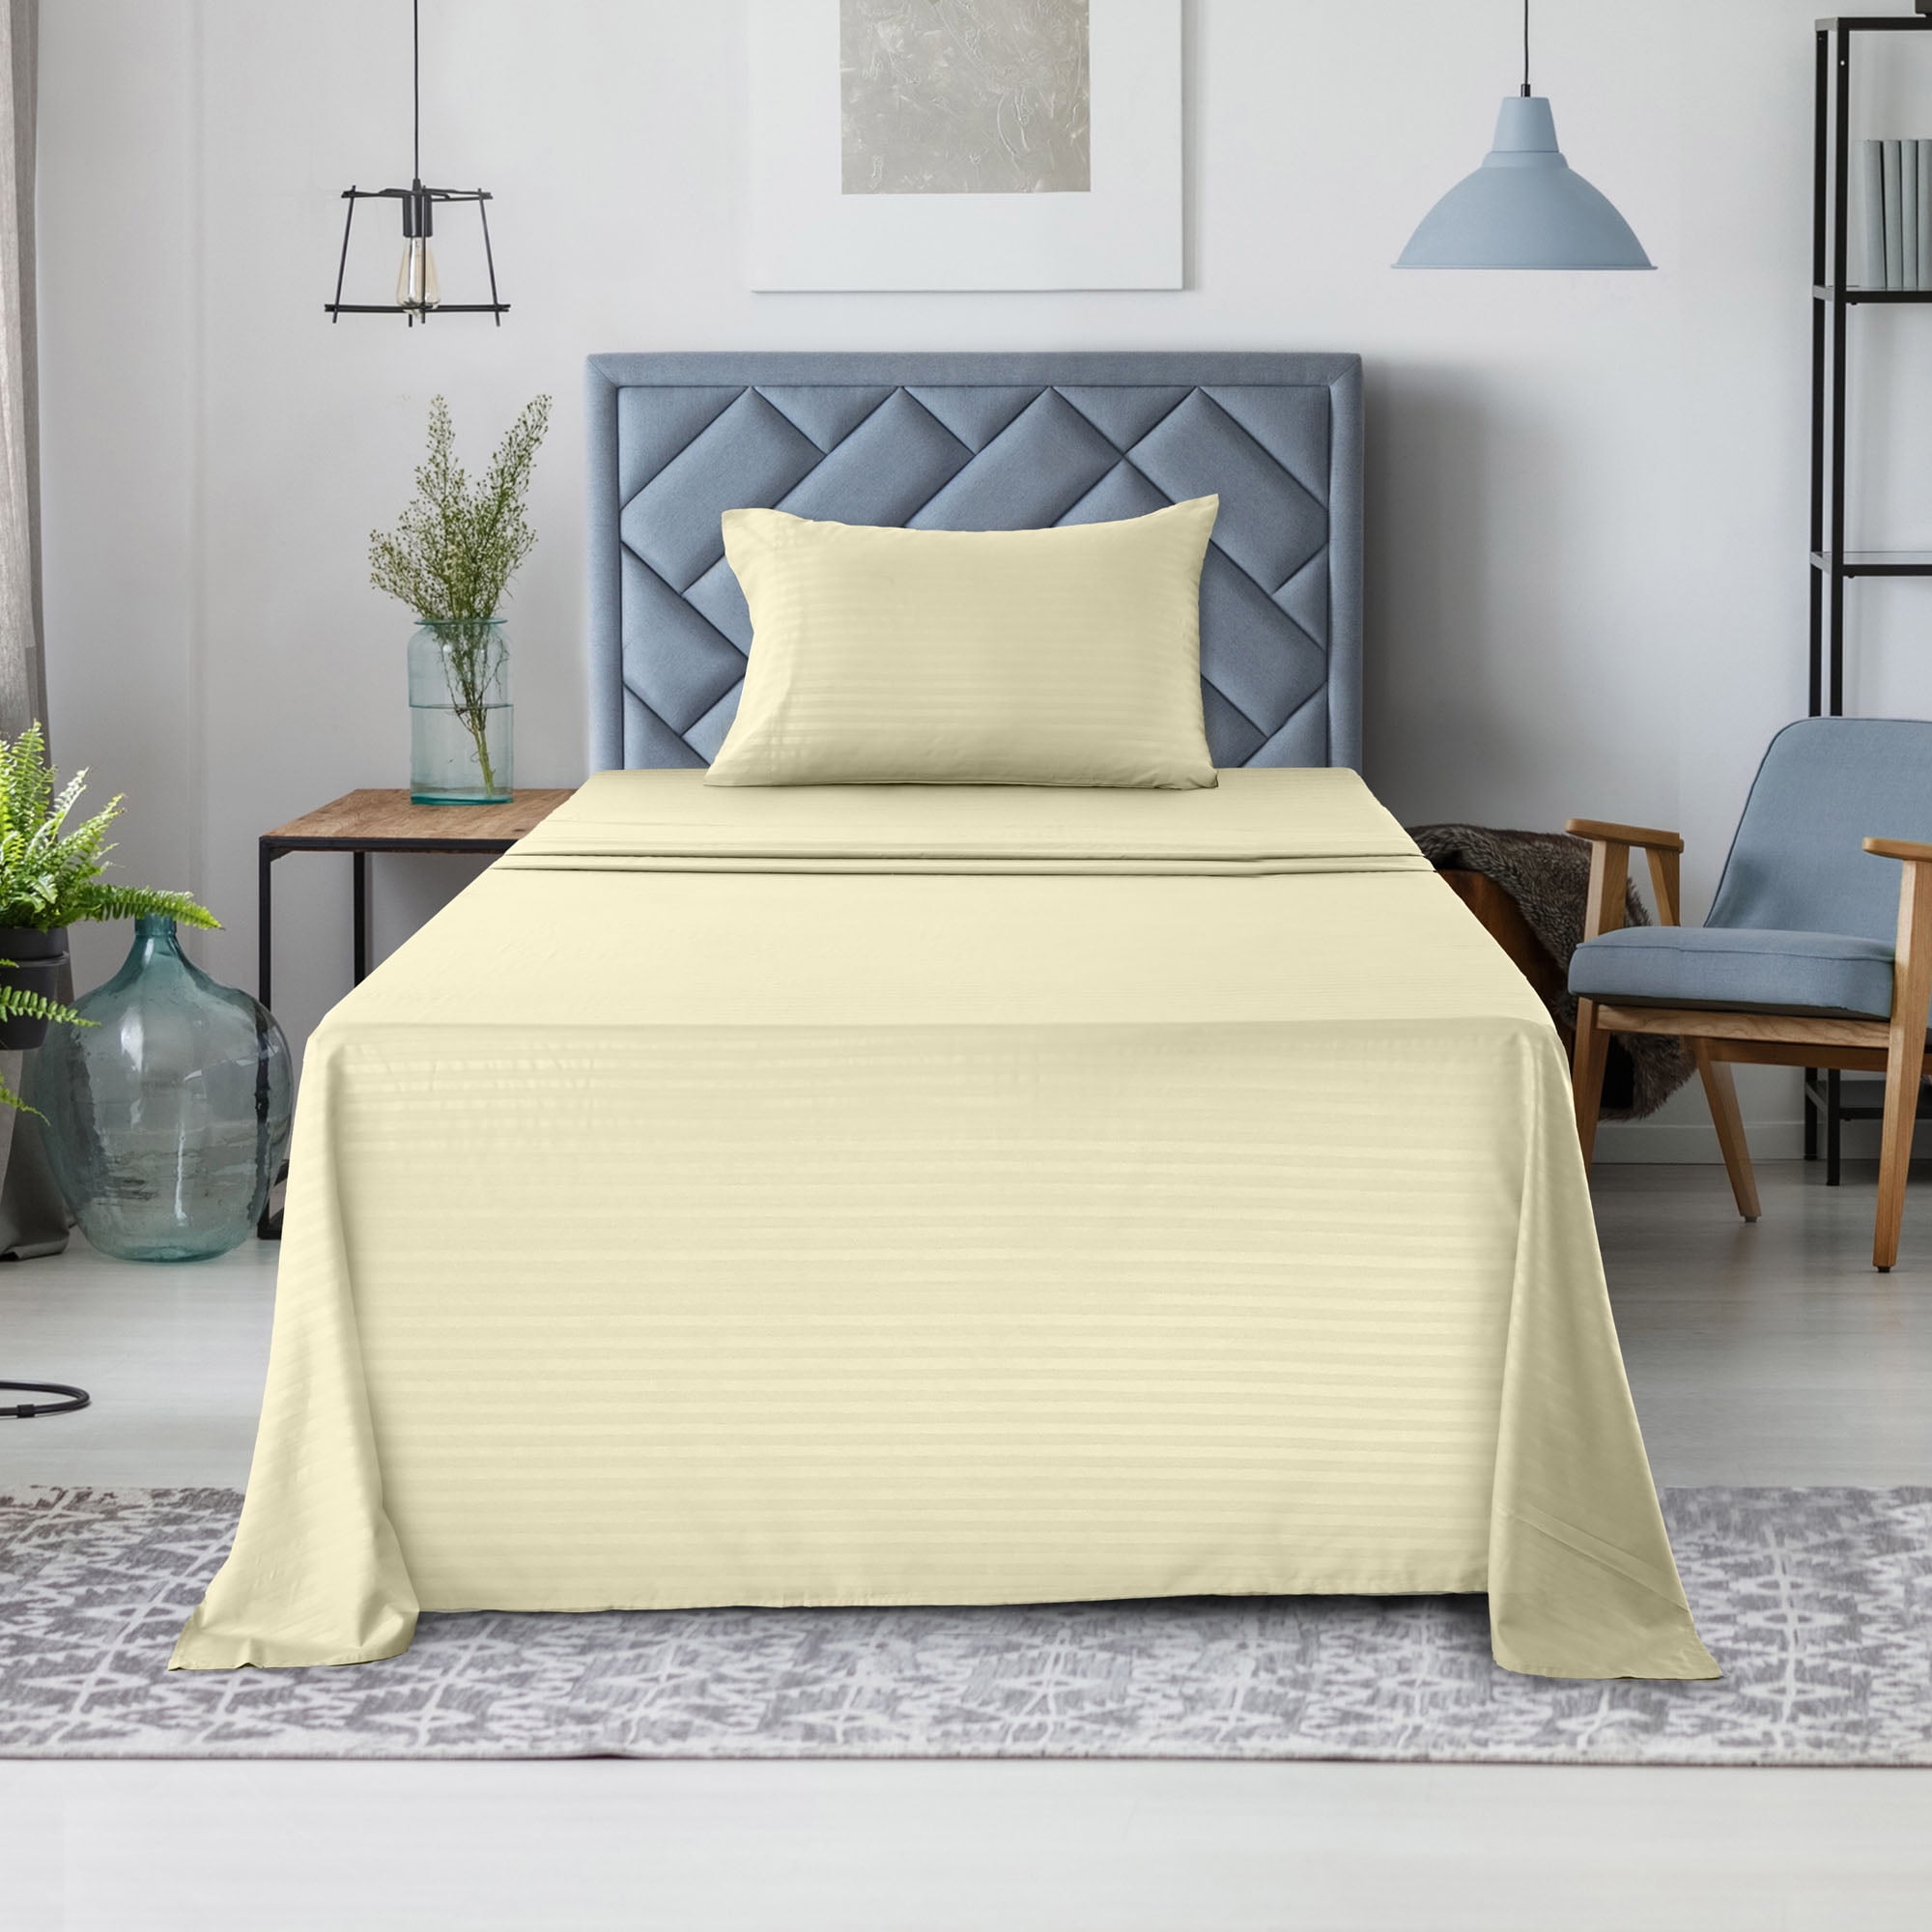 Lux Decor Collection Bed Sheets - Soft Microfiber Bedding Sheets